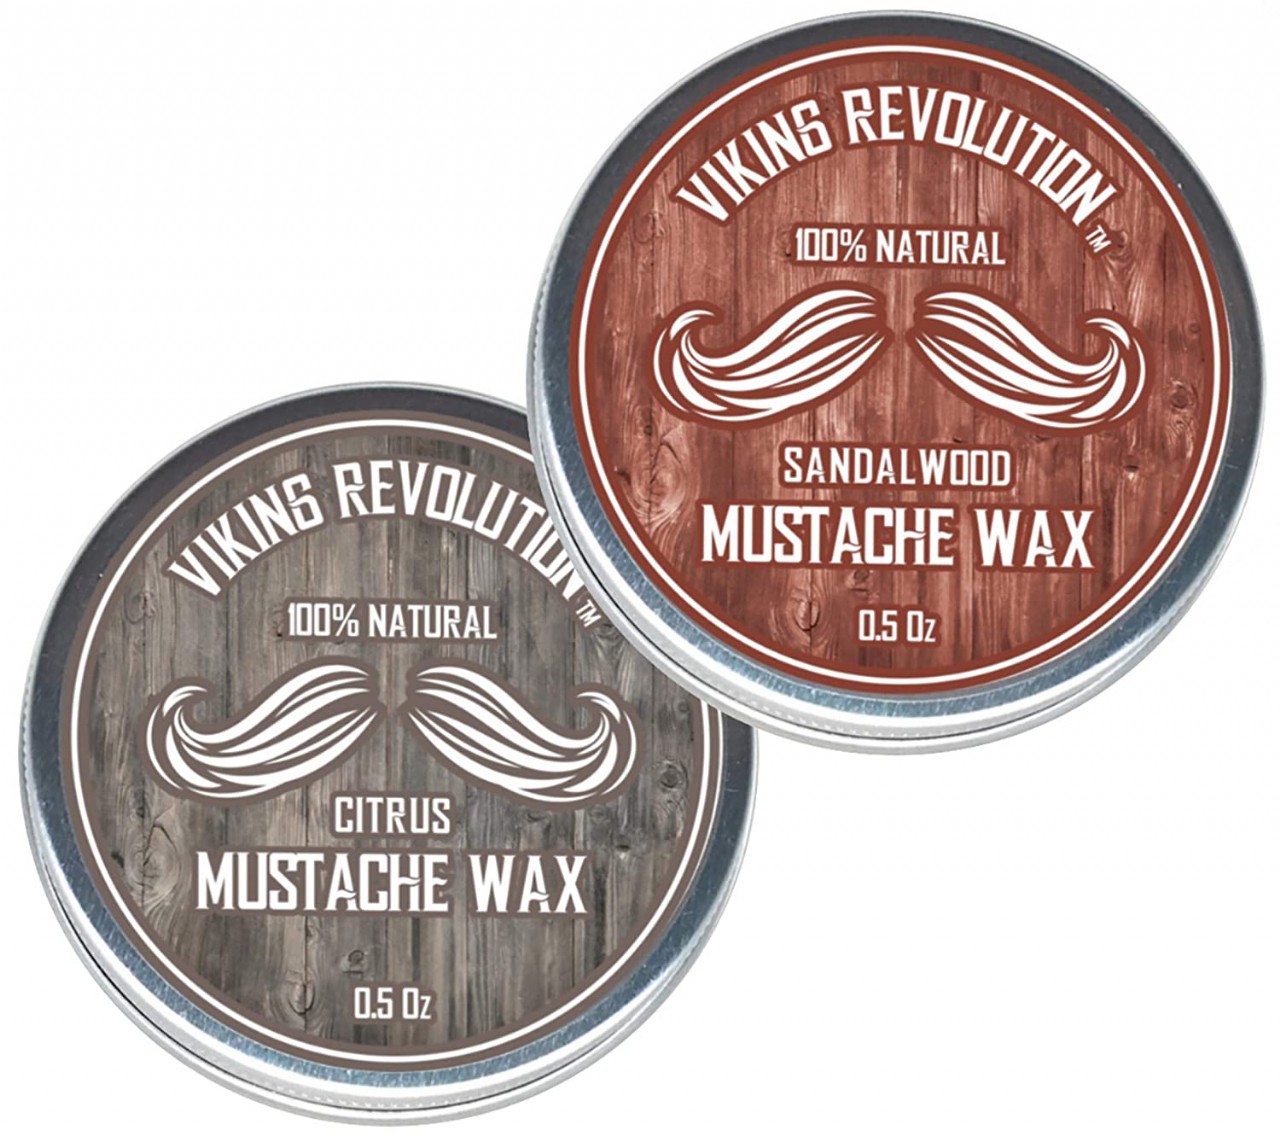 Mustache Wax 2 Pack - Beard & Moustache Wax for Men - Strong Hold Helps Train Tame & Style